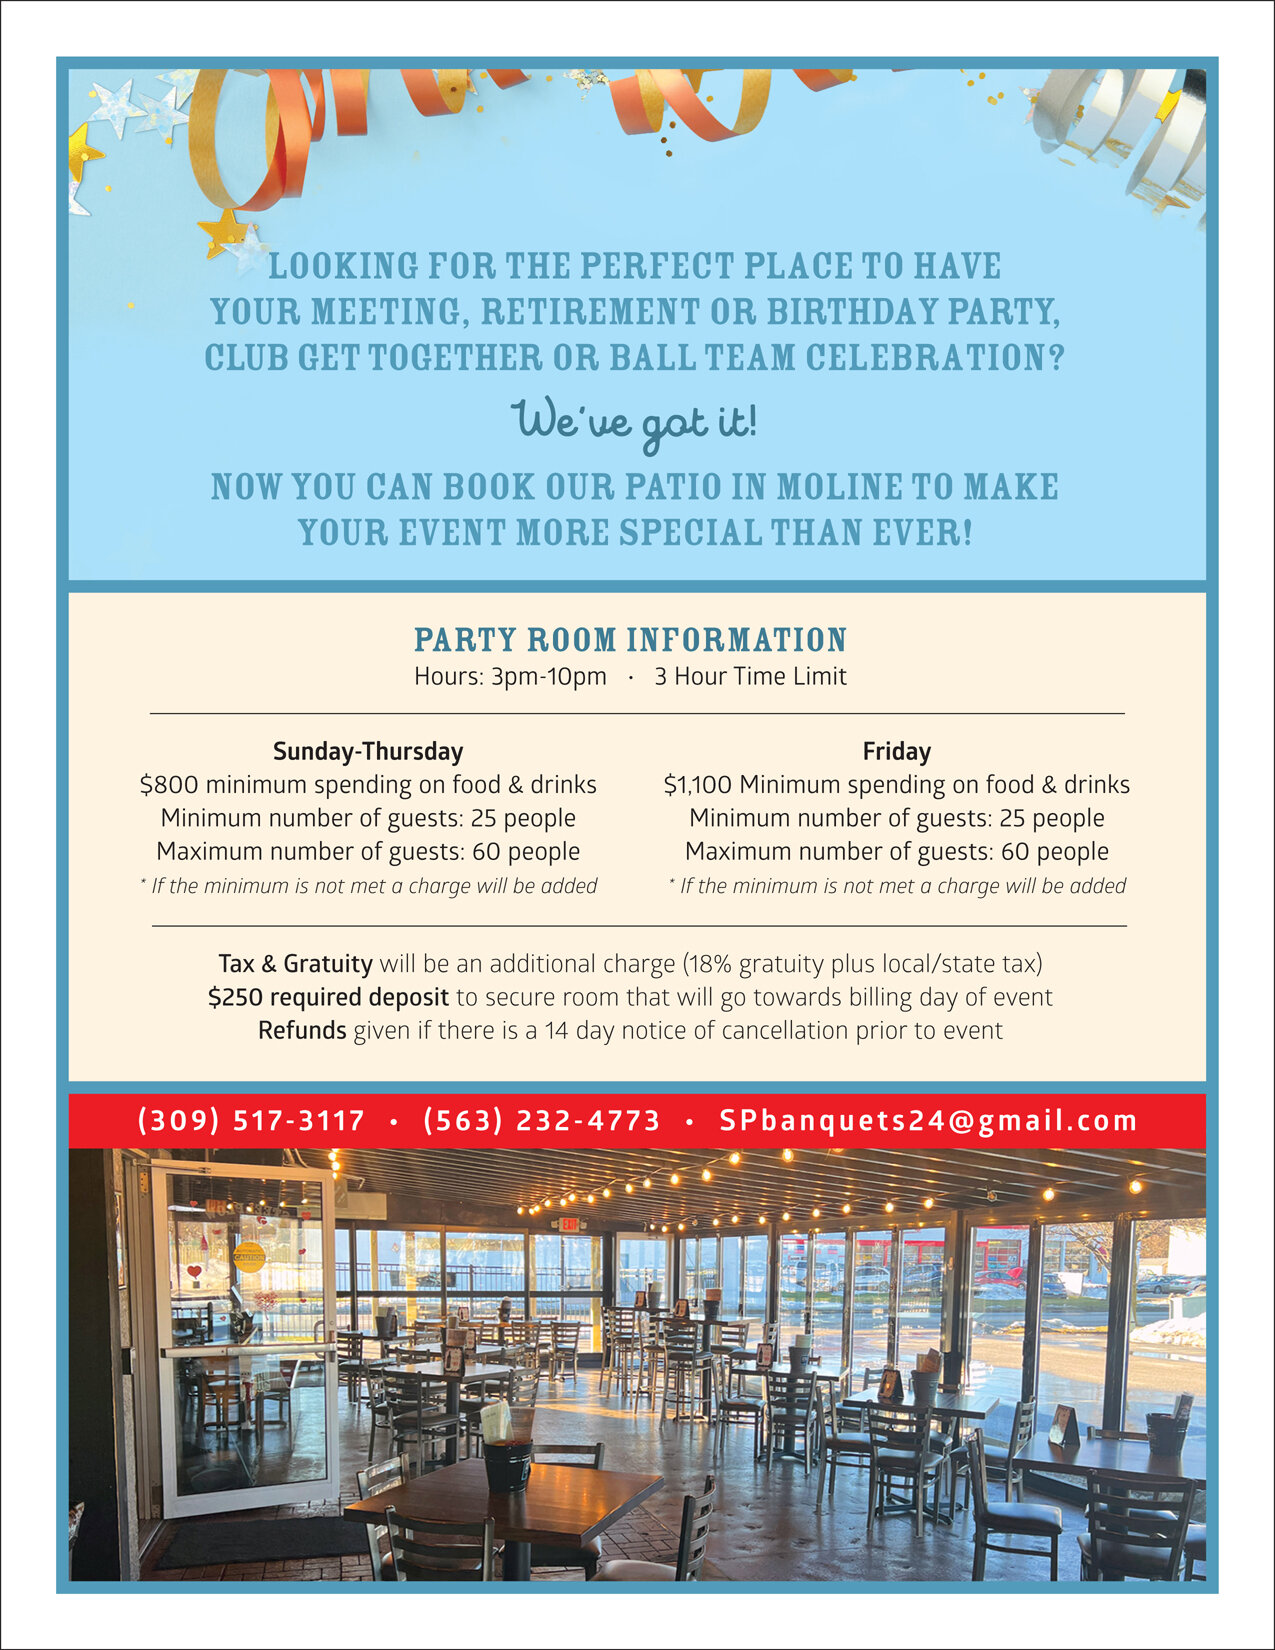 Plan your party at everyone&rsquo;s favorite burger bar! Head to our website for more information: www.steelplowburger.com/party-rentals